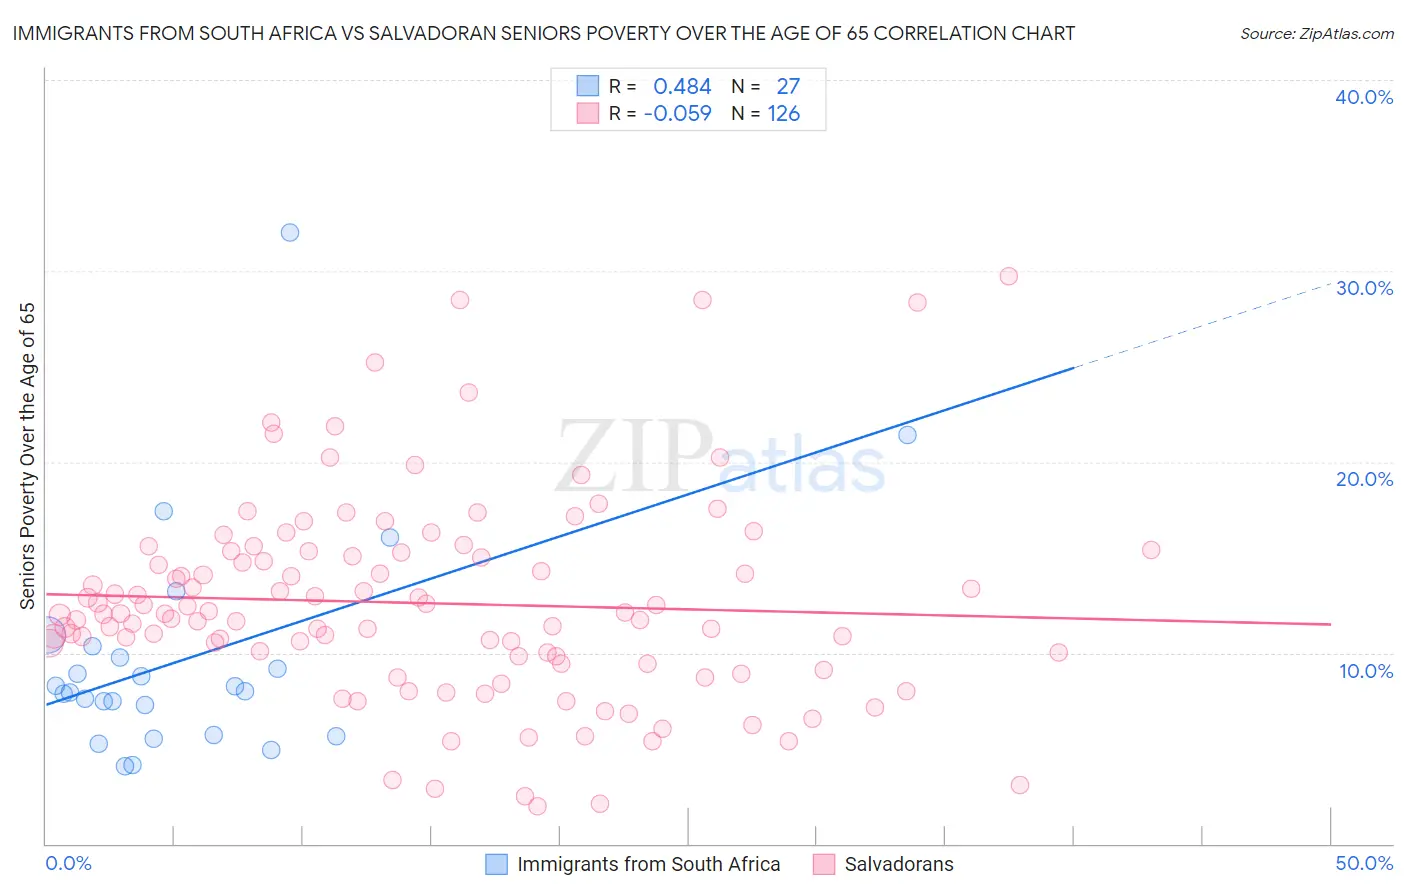 Immigrants from South Africa vs Salvadoran Seniors Poverty Over the Age of 65